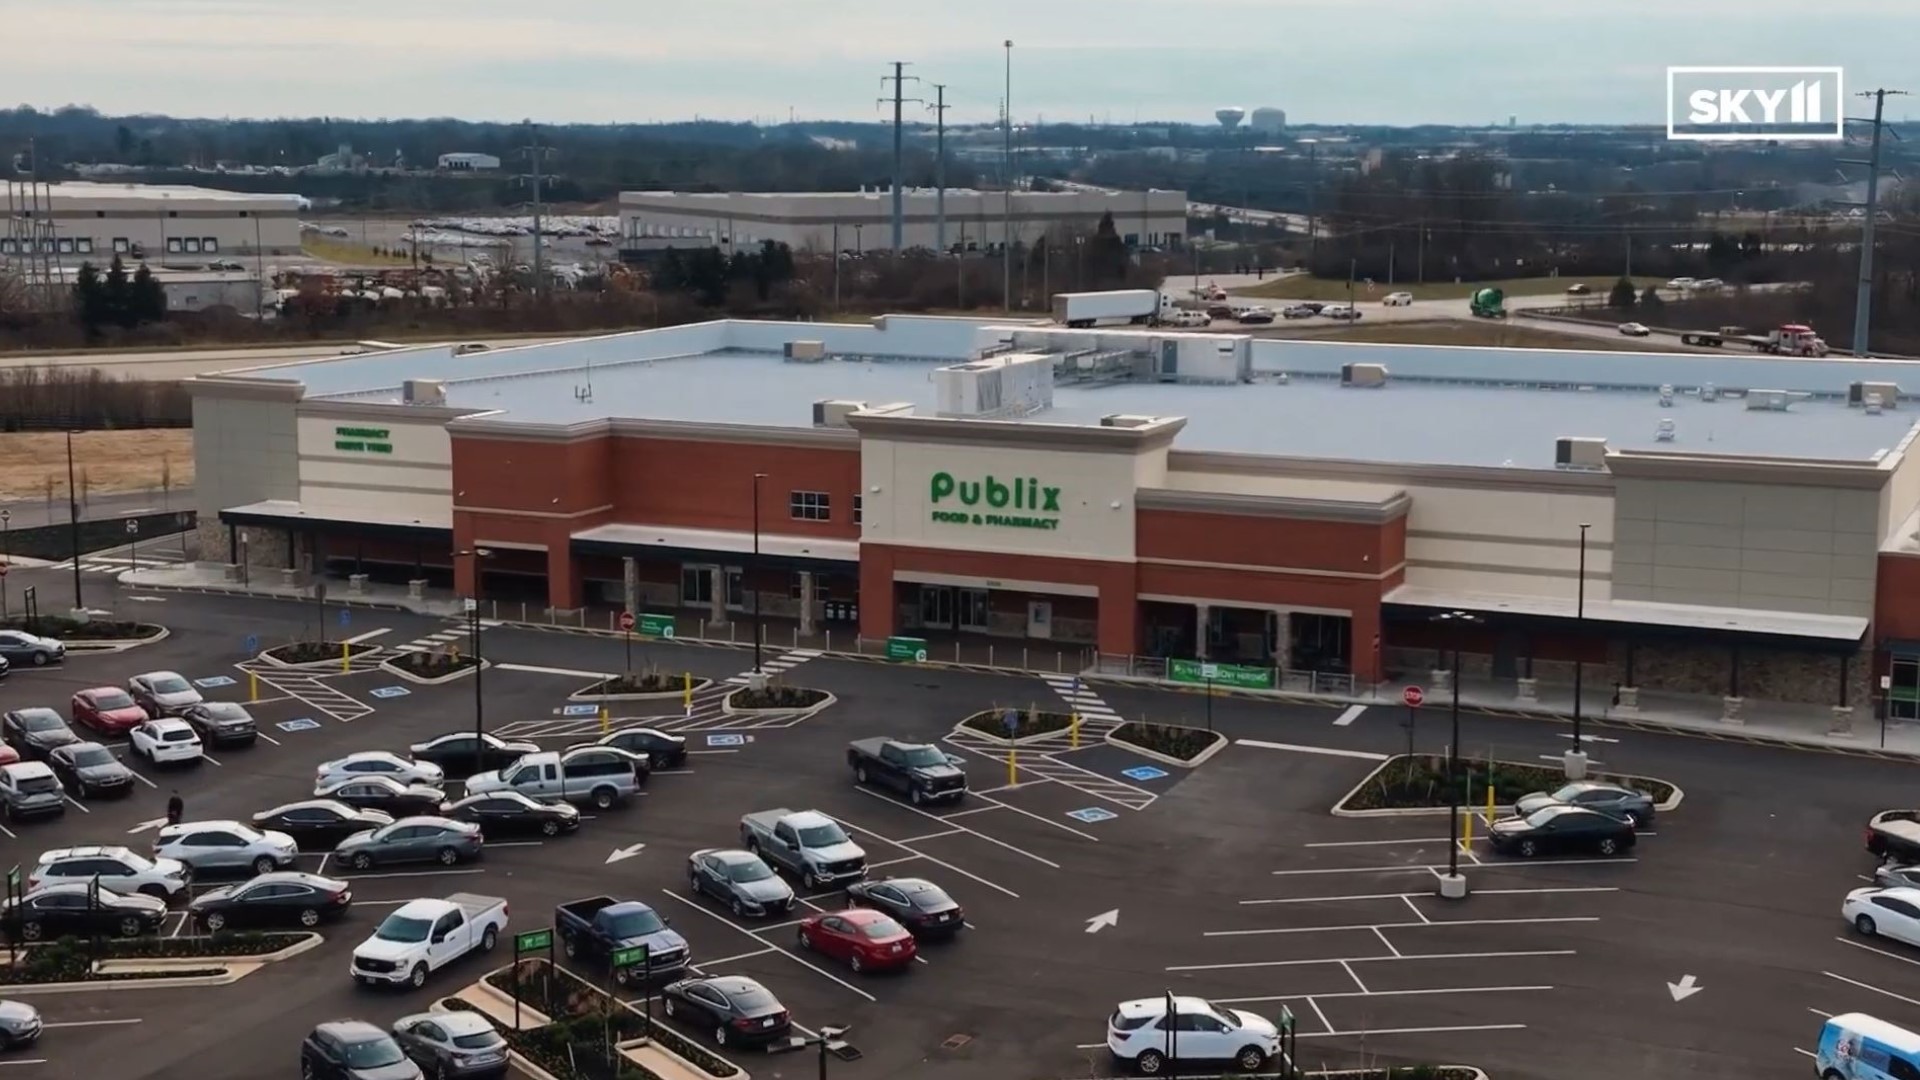 Publix is located near I-265 off Old Henry Road and Terra Crossing Boulevard.